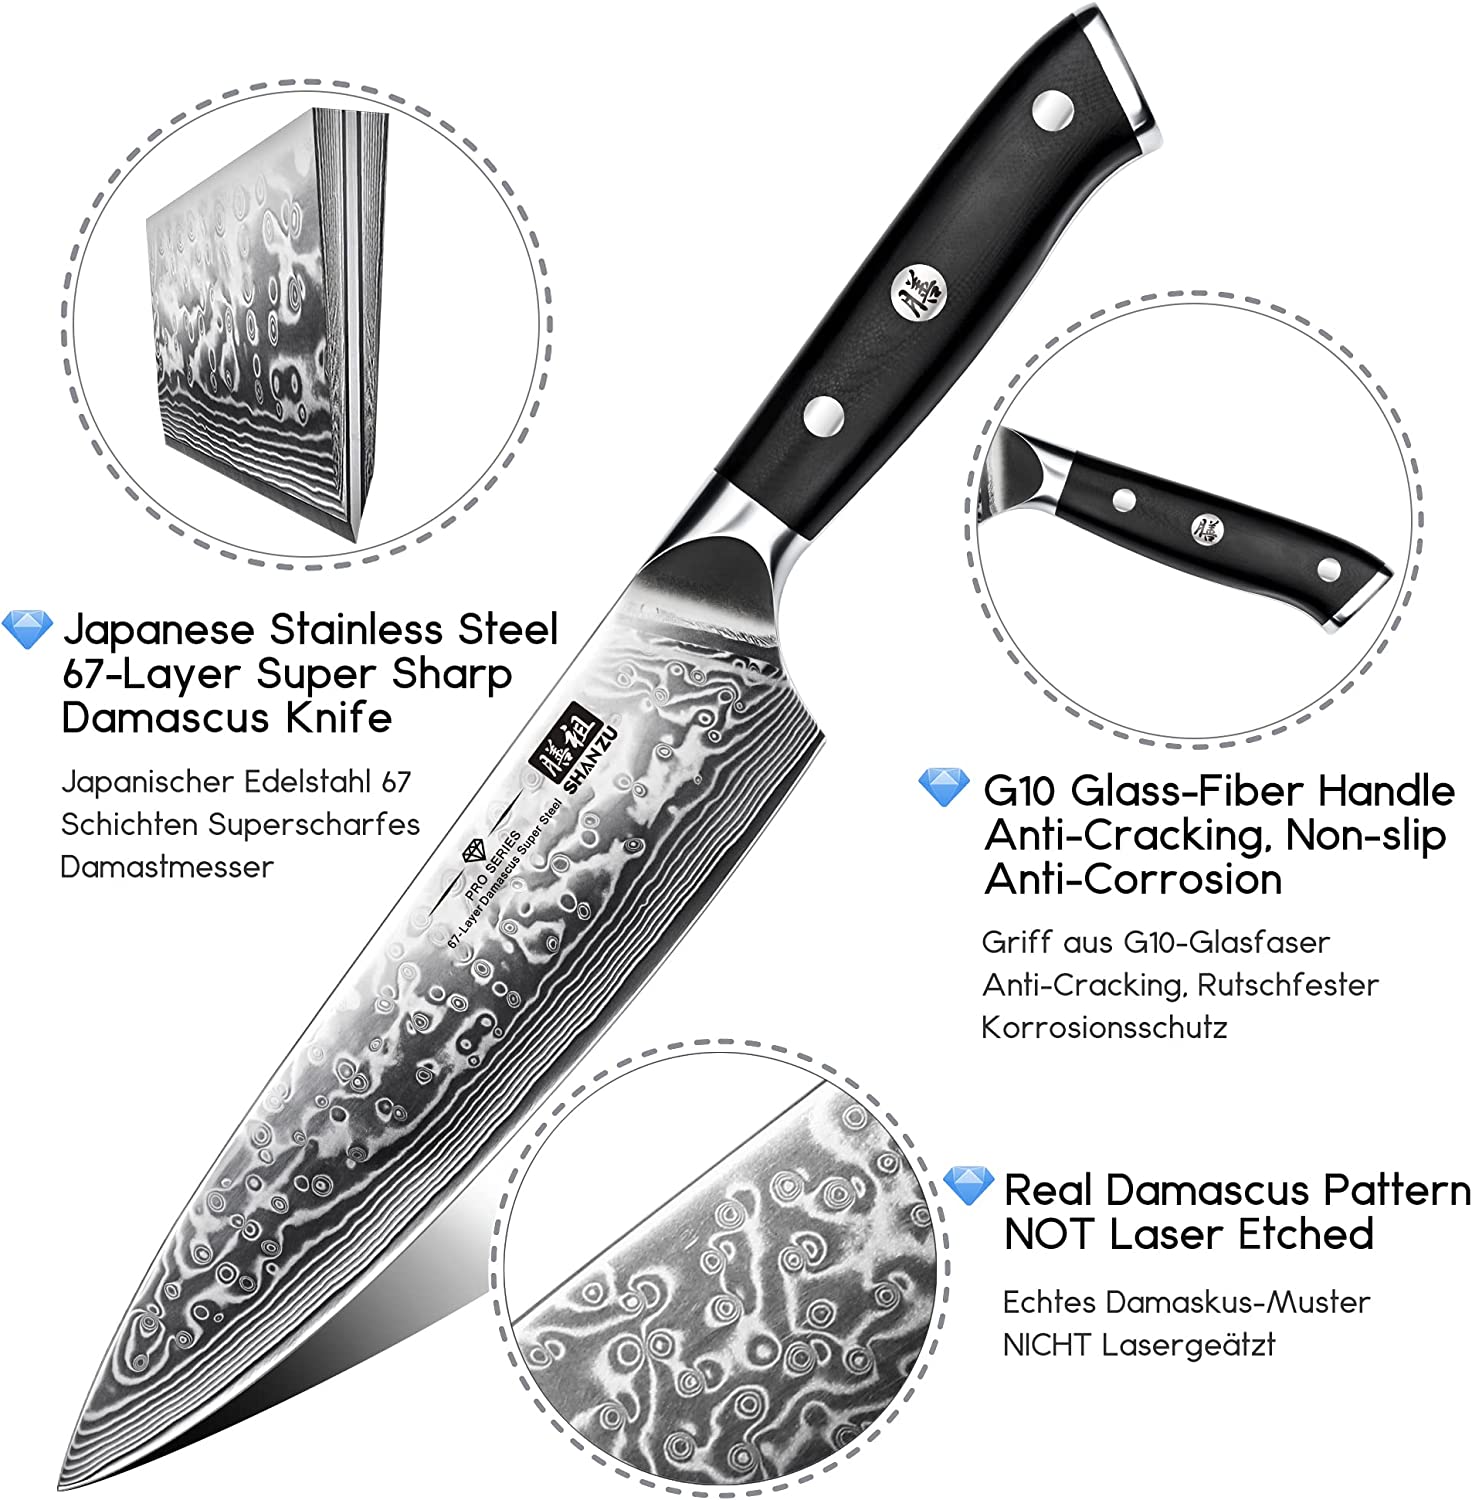 The Basics of Damascus Chef Knife - Why You Should Get One